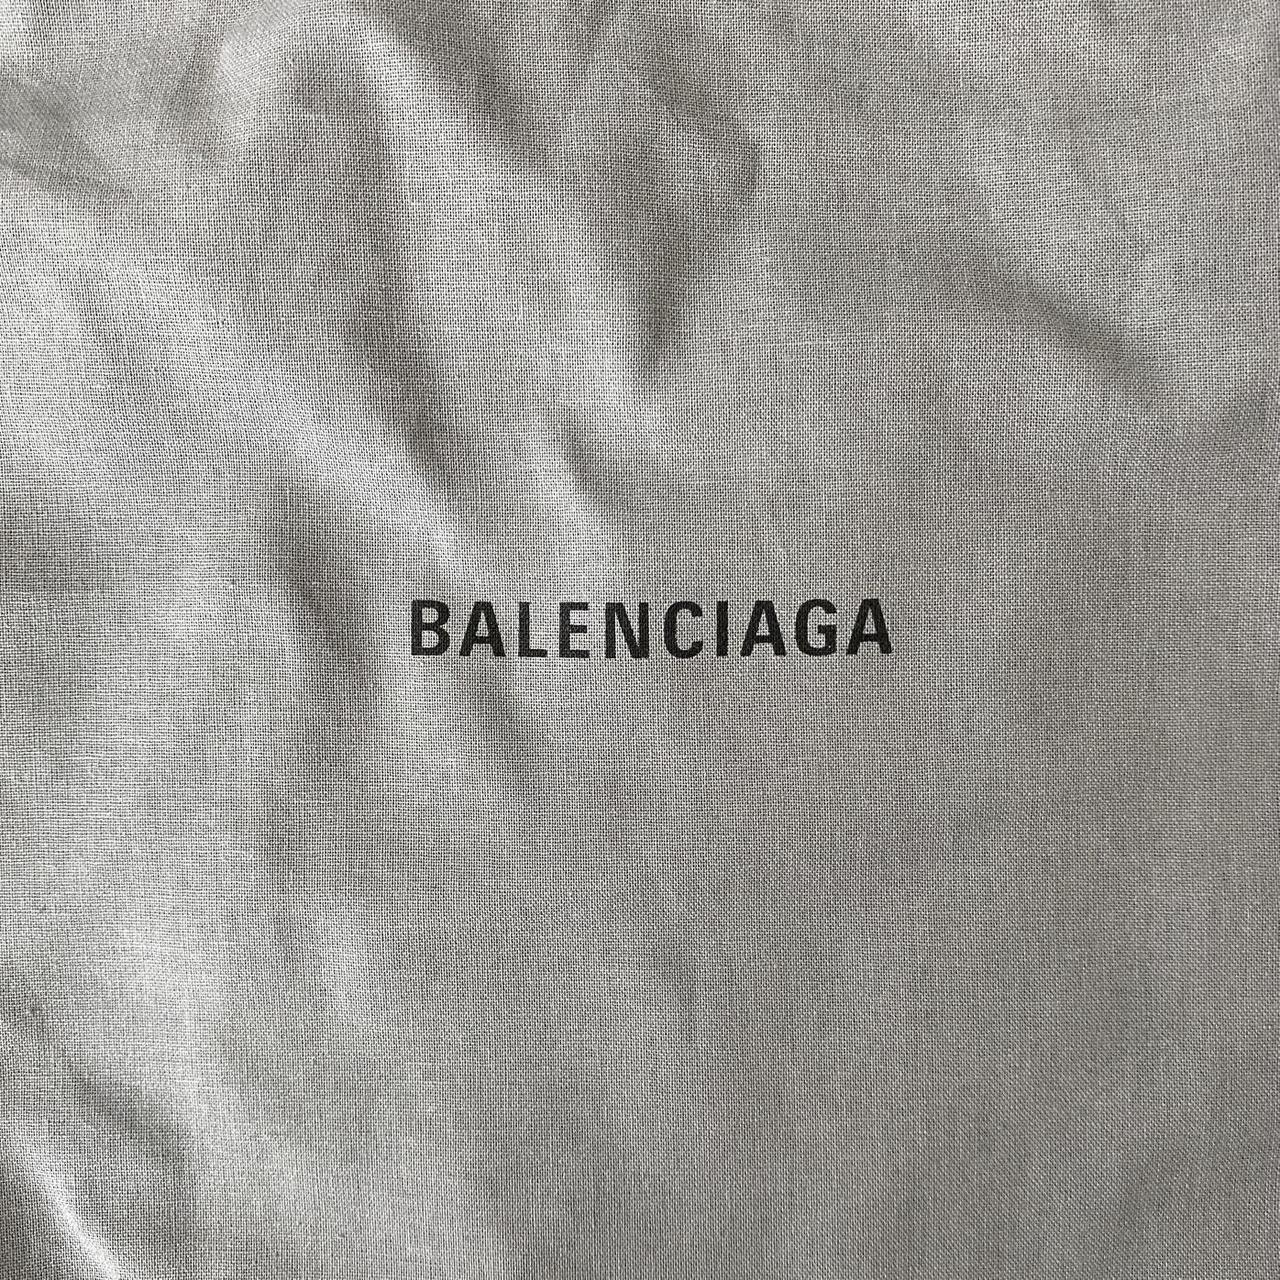 Balenciaga Women's White and Silver Trainers | Depop